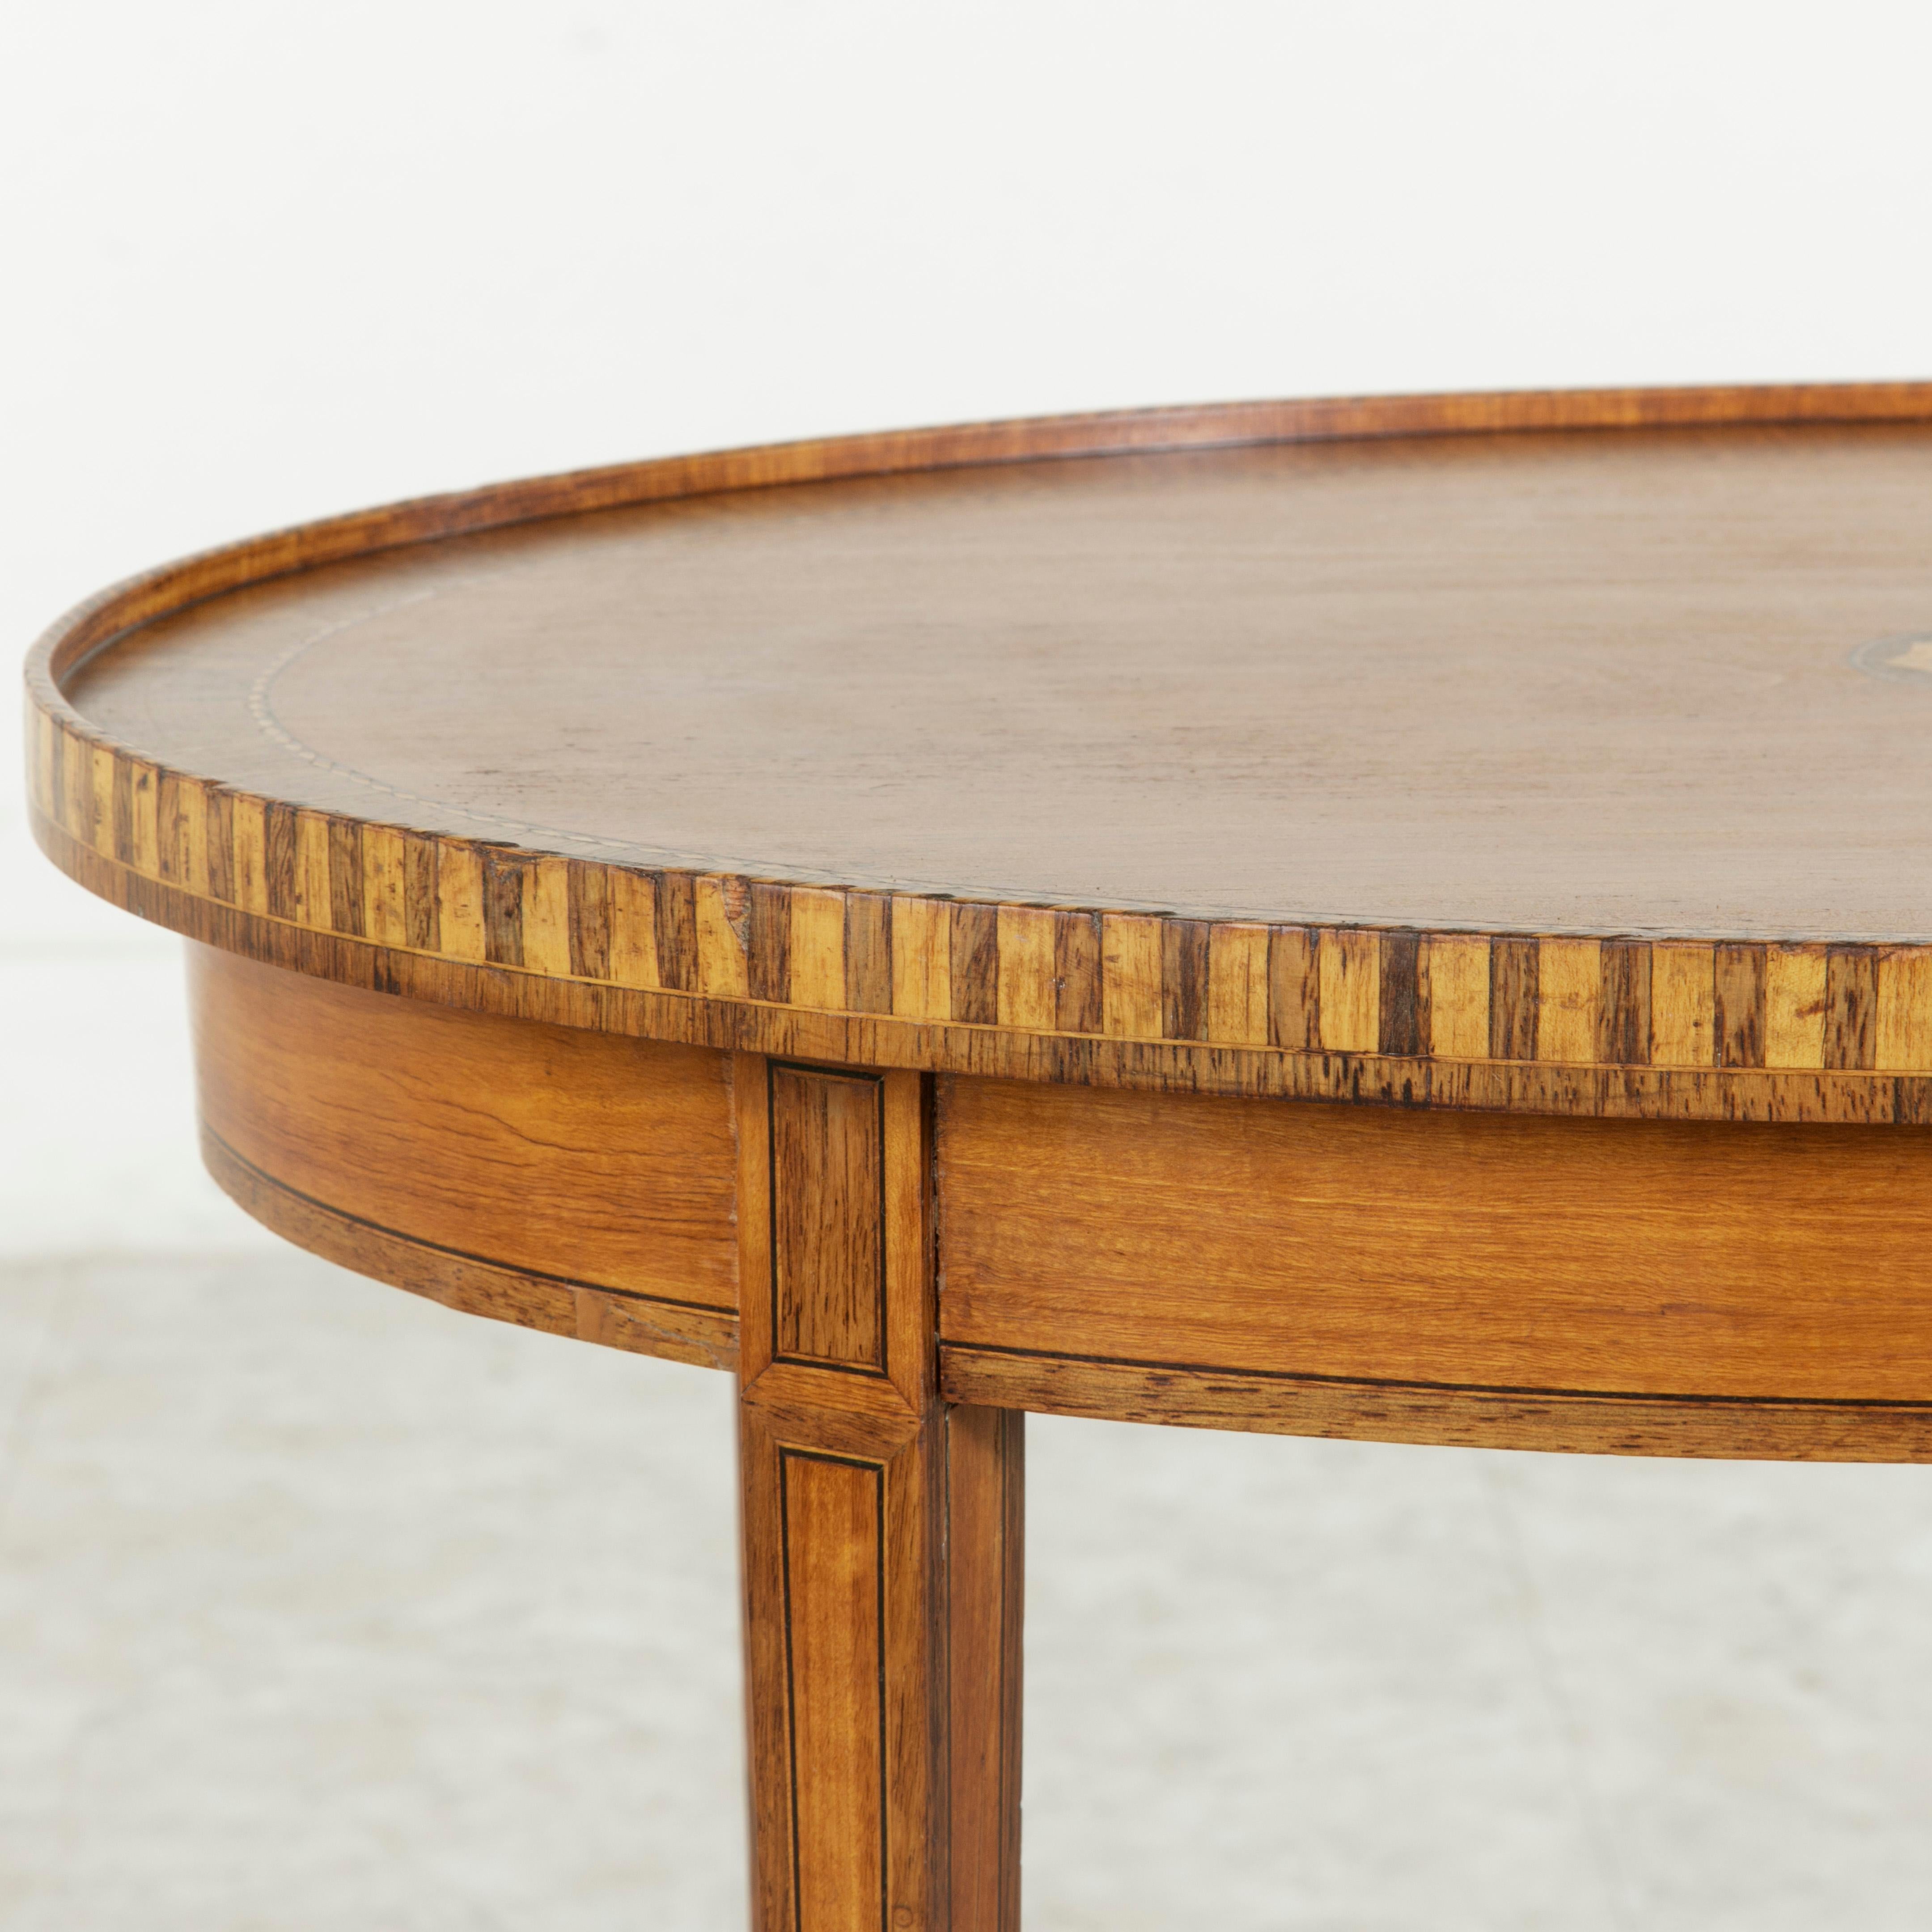 Neoclassical Early 20th Century French Neoclassic Louis XVI Style Oval Marquetry Side Table